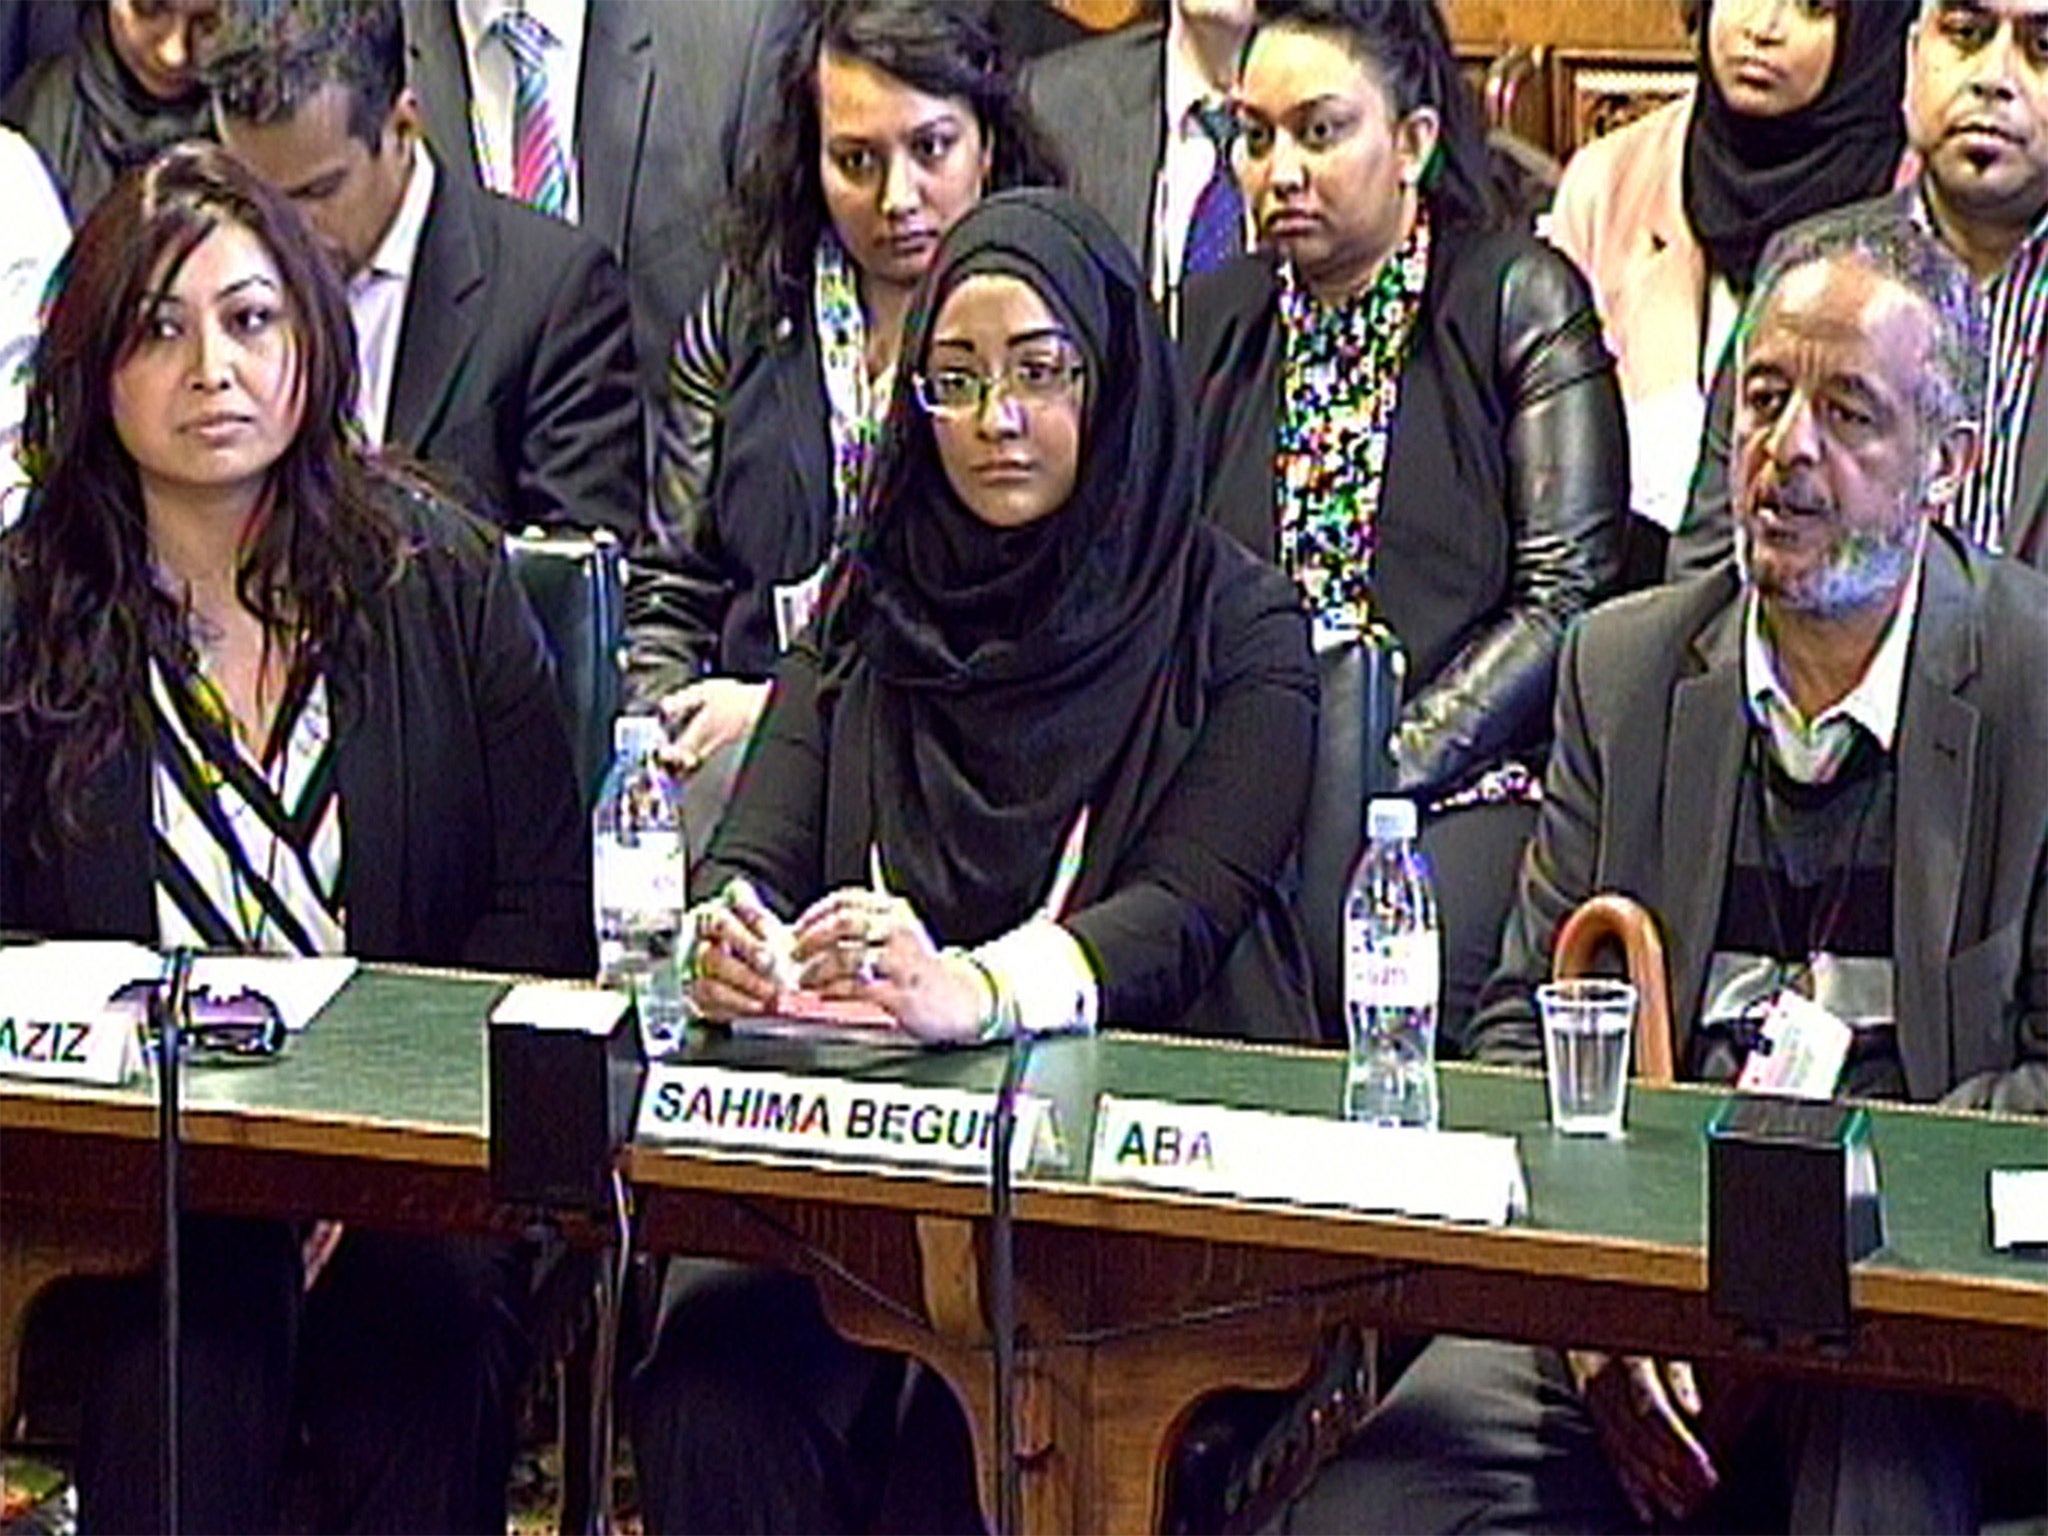 From left: Fahmida Aziz, Kadiza Sultana’s cousin; Sahima Begum, Shamima’s older sister, and Hussen Abase, father of Amira, appear before the committee on Tuesday